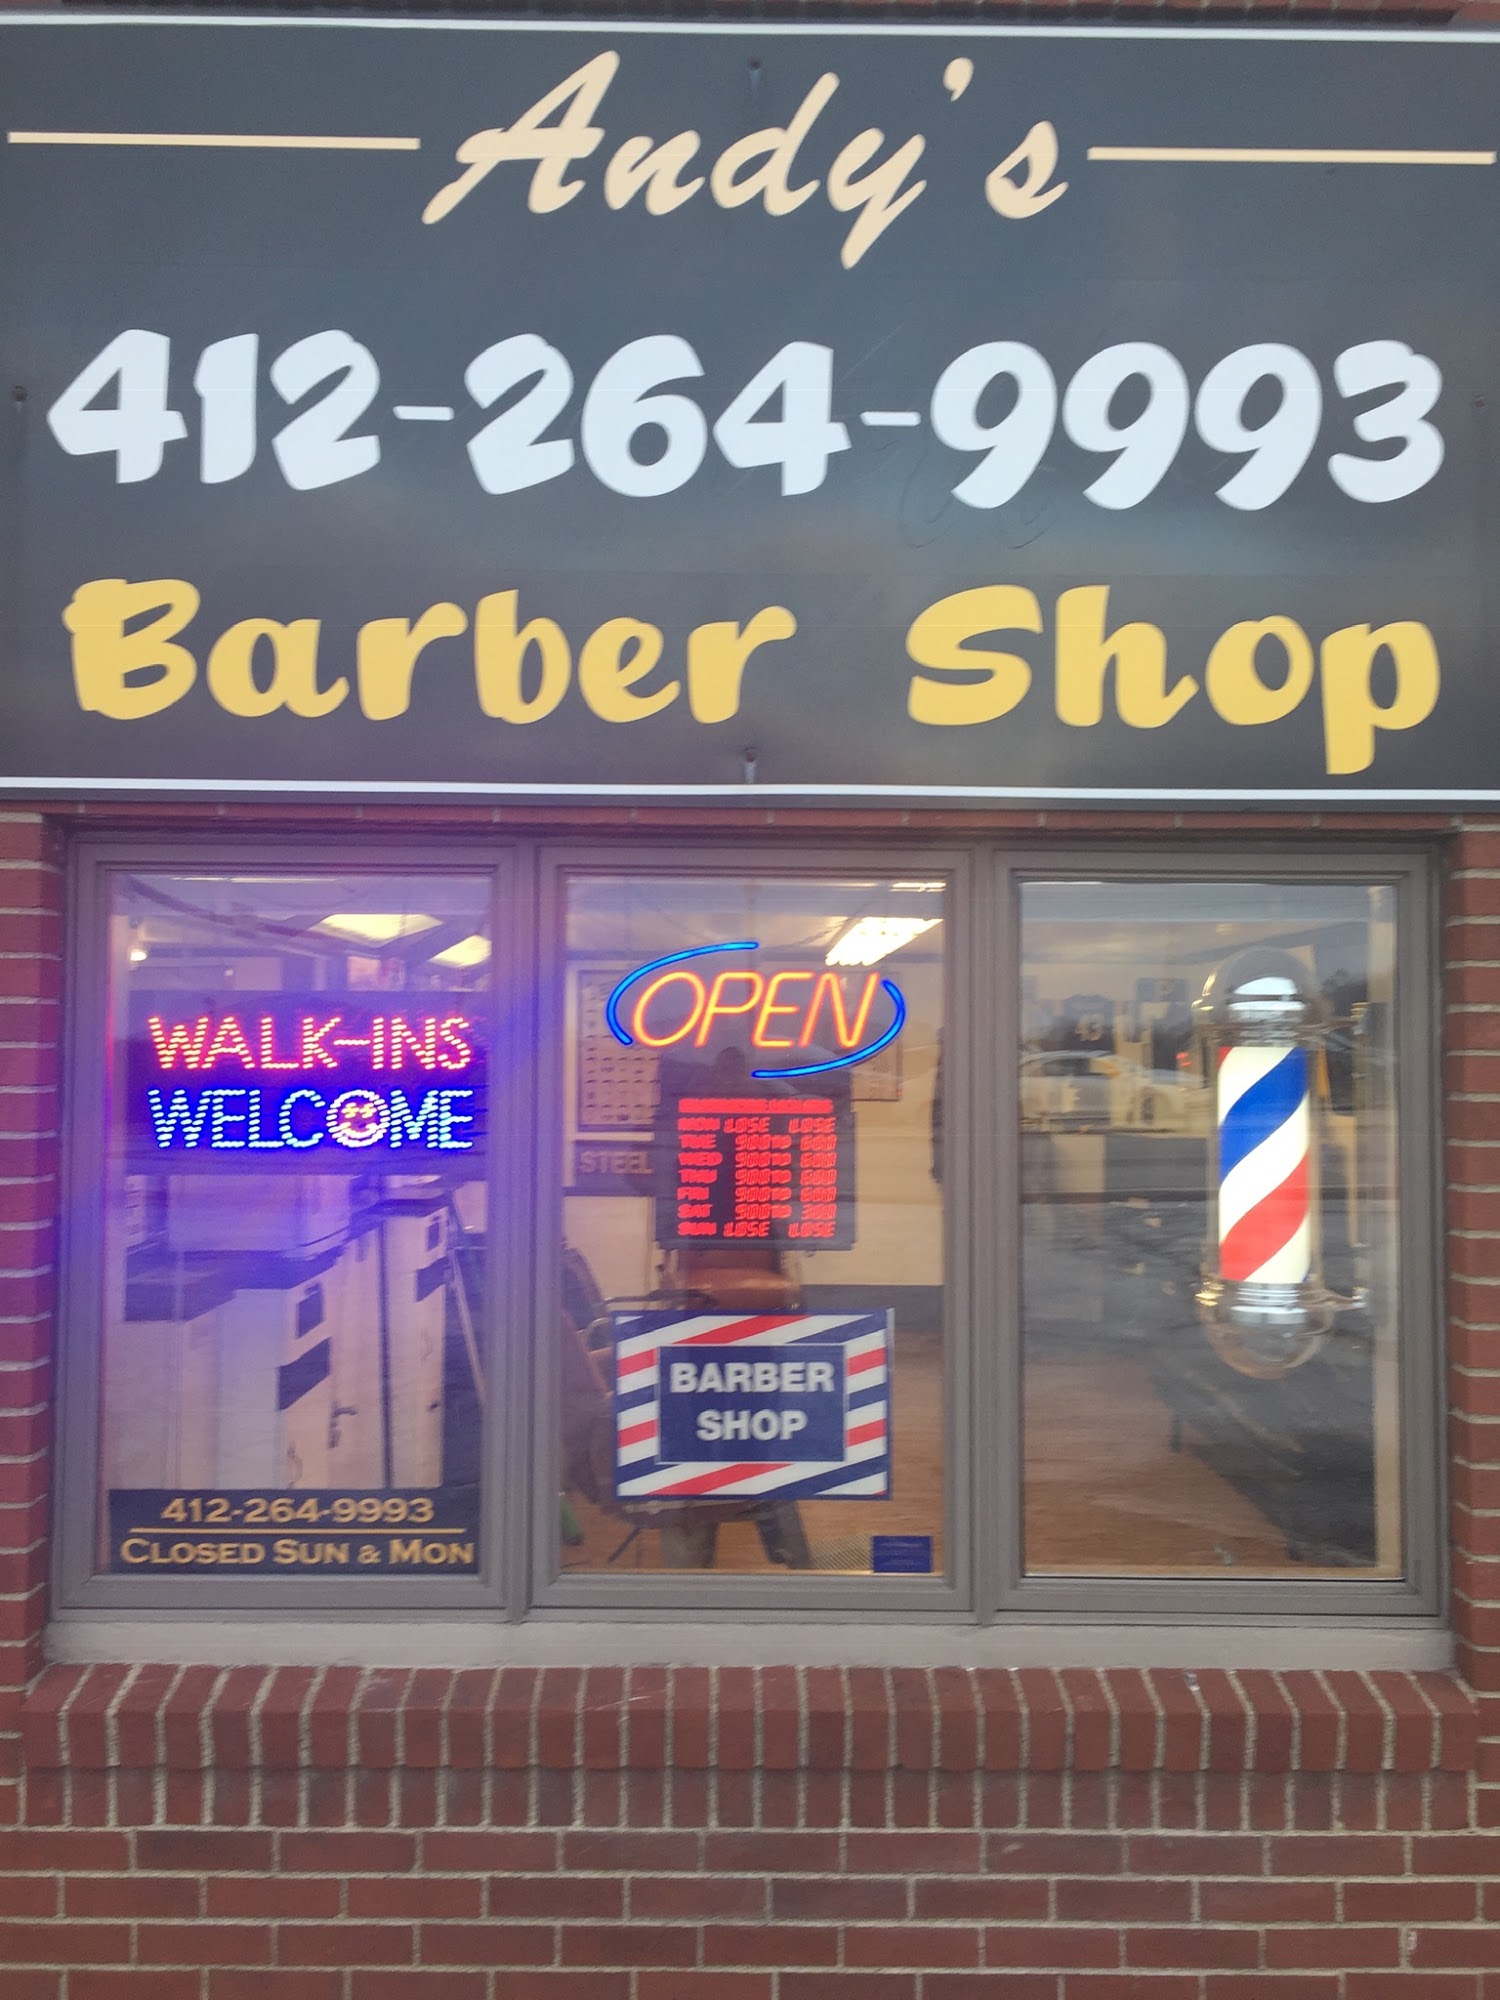 Andy’s Barber Shop